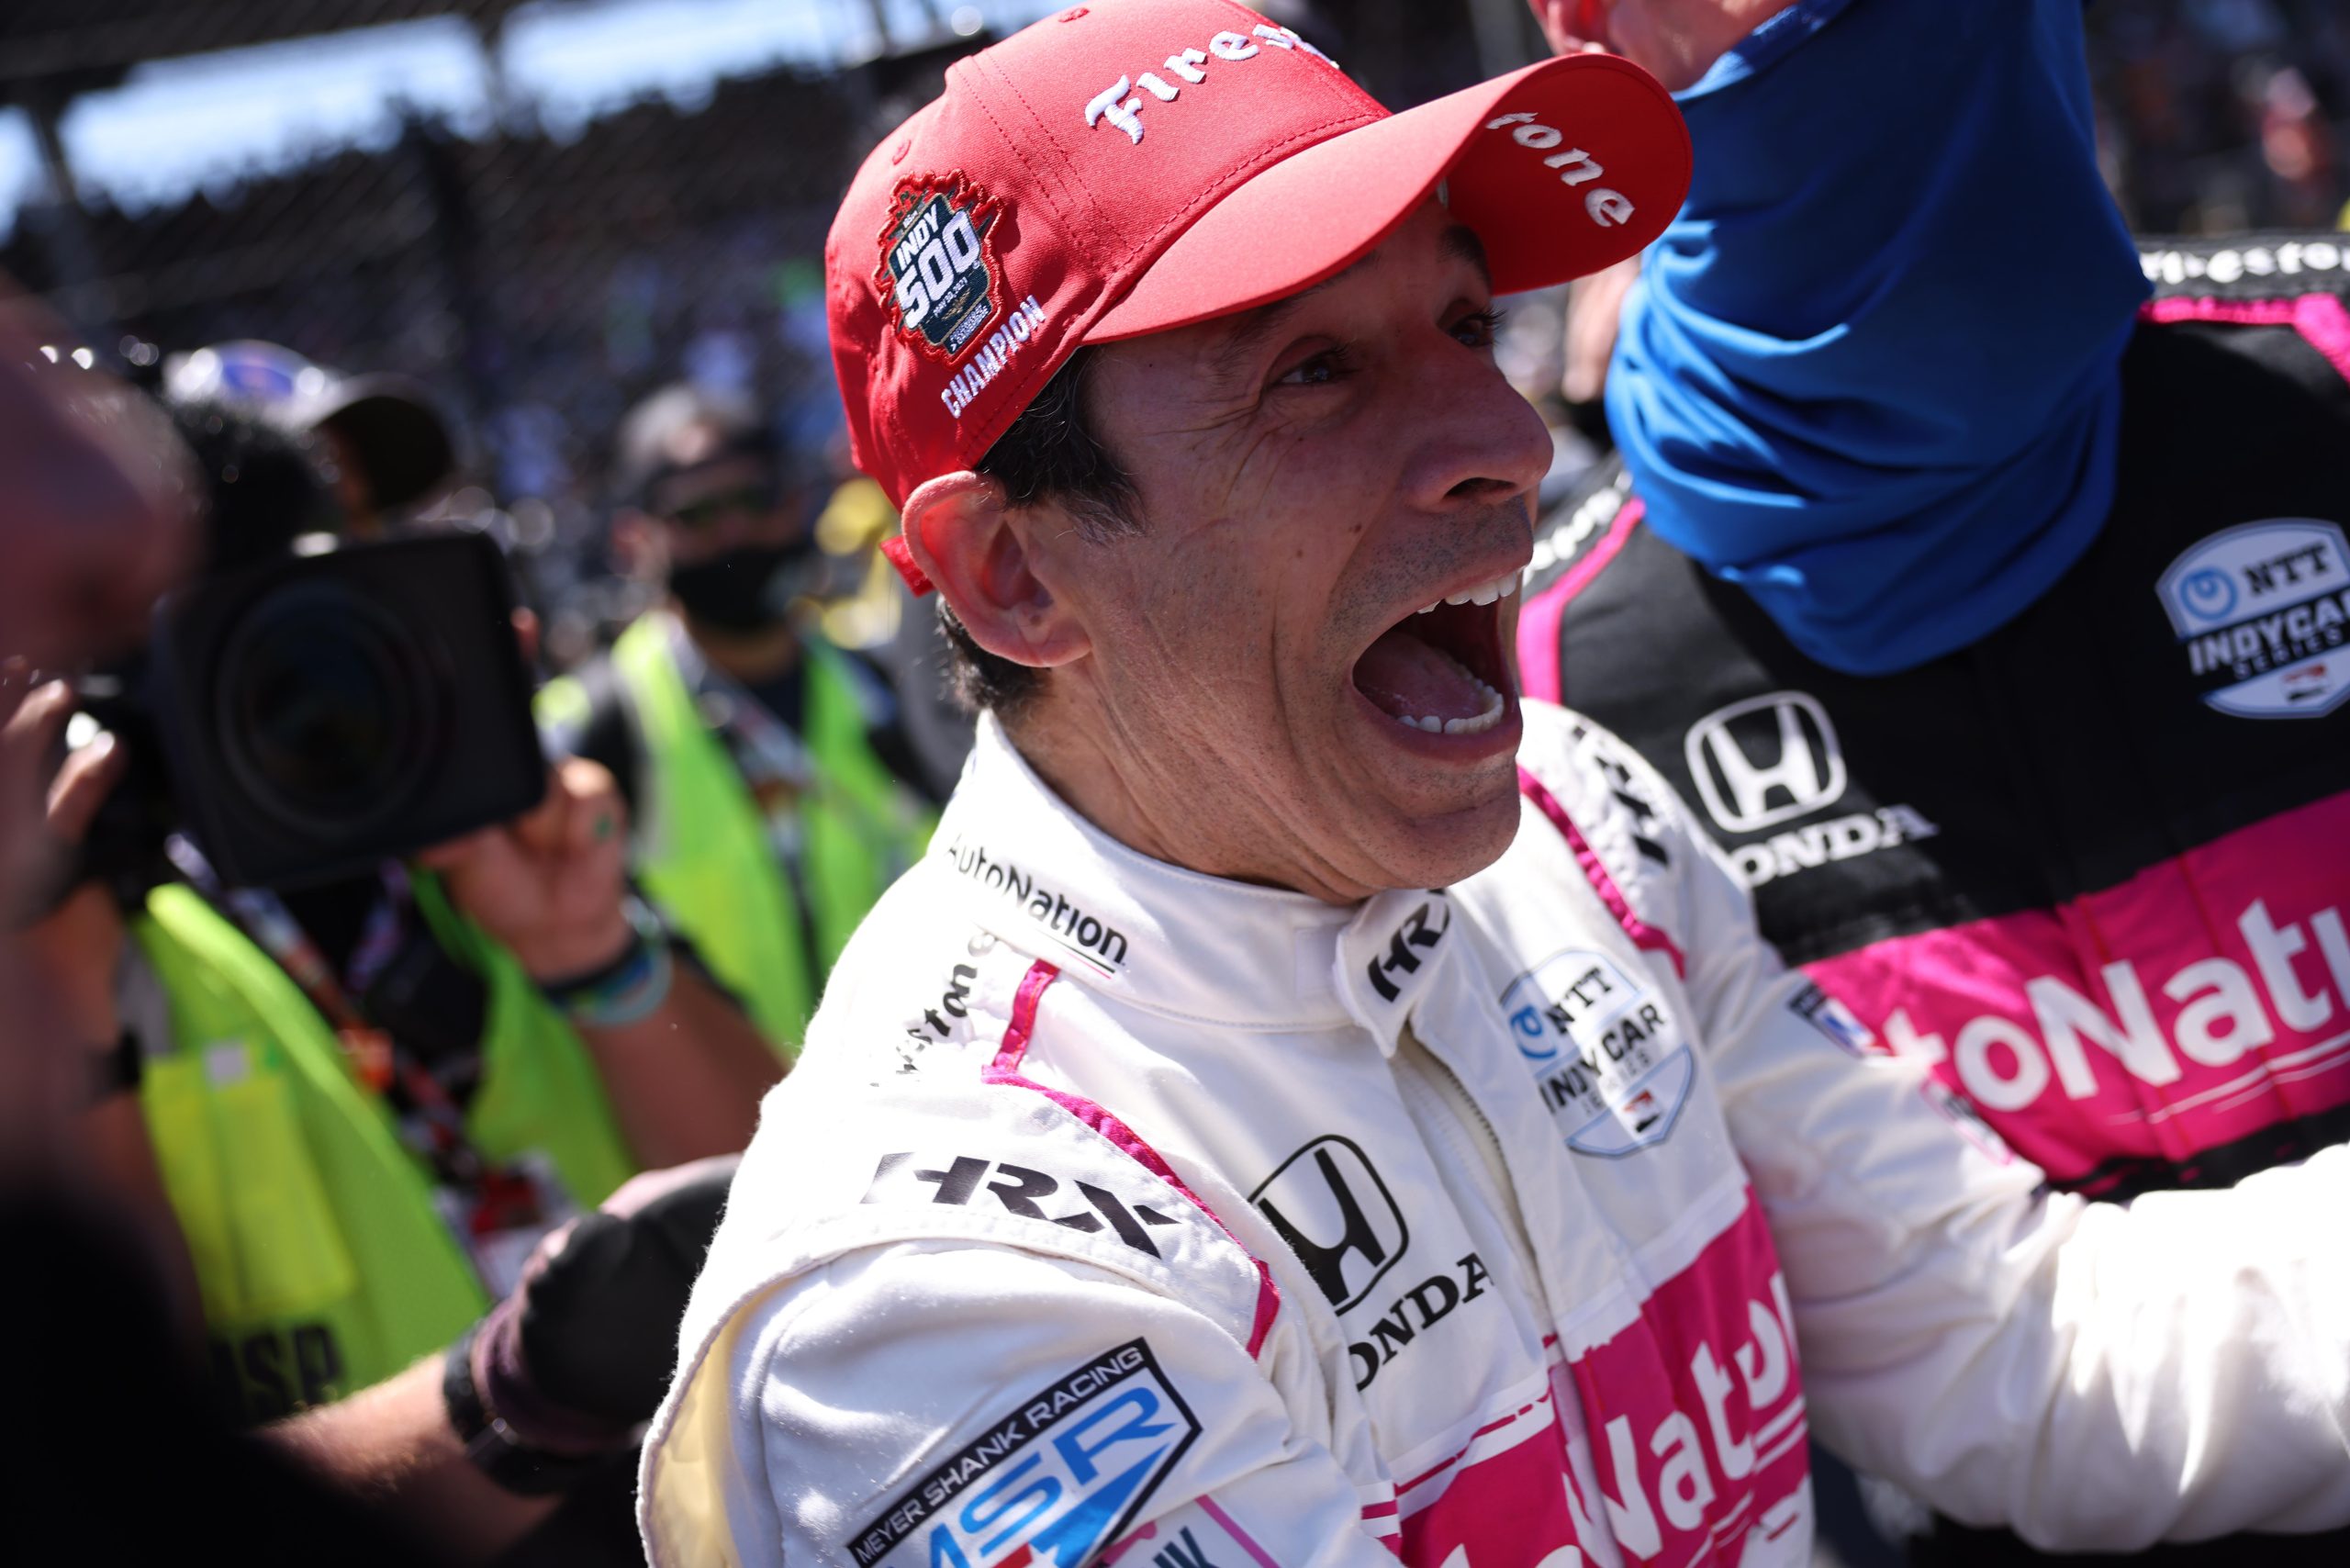 Helio Castroneves celebrates his victory at the 2021 Indianapolis 500 (Matt Fraver/Penske Entertainment)